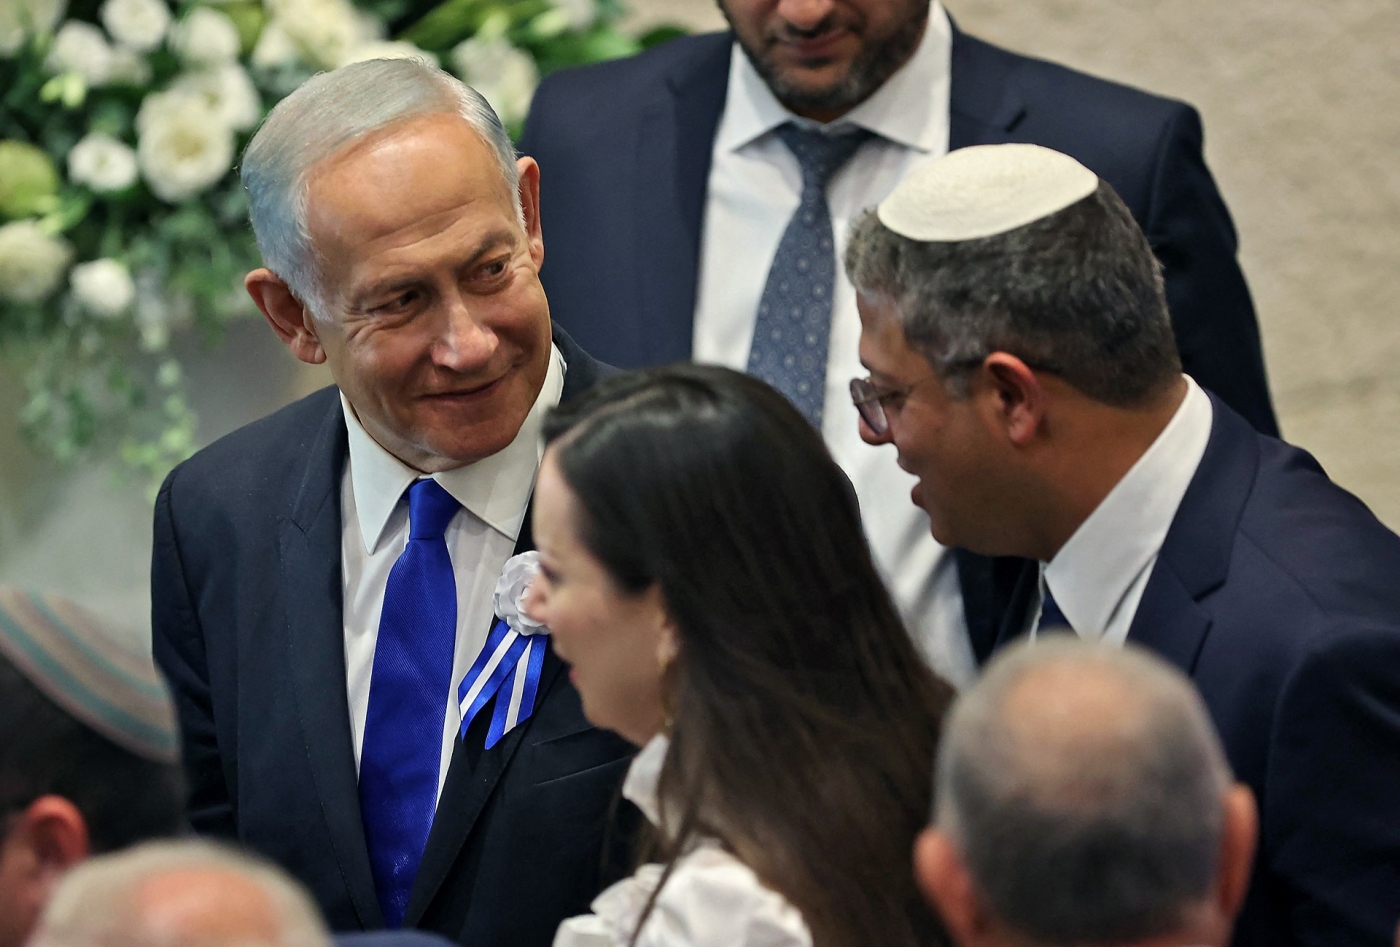 Itamar Ben-Gvir (R) chats with incoming Prime Minister Benjamin Netanyahu (L) during the swearing in ceremony of the new Israeli parliament in Jerusalem, on 15 November (AFP)